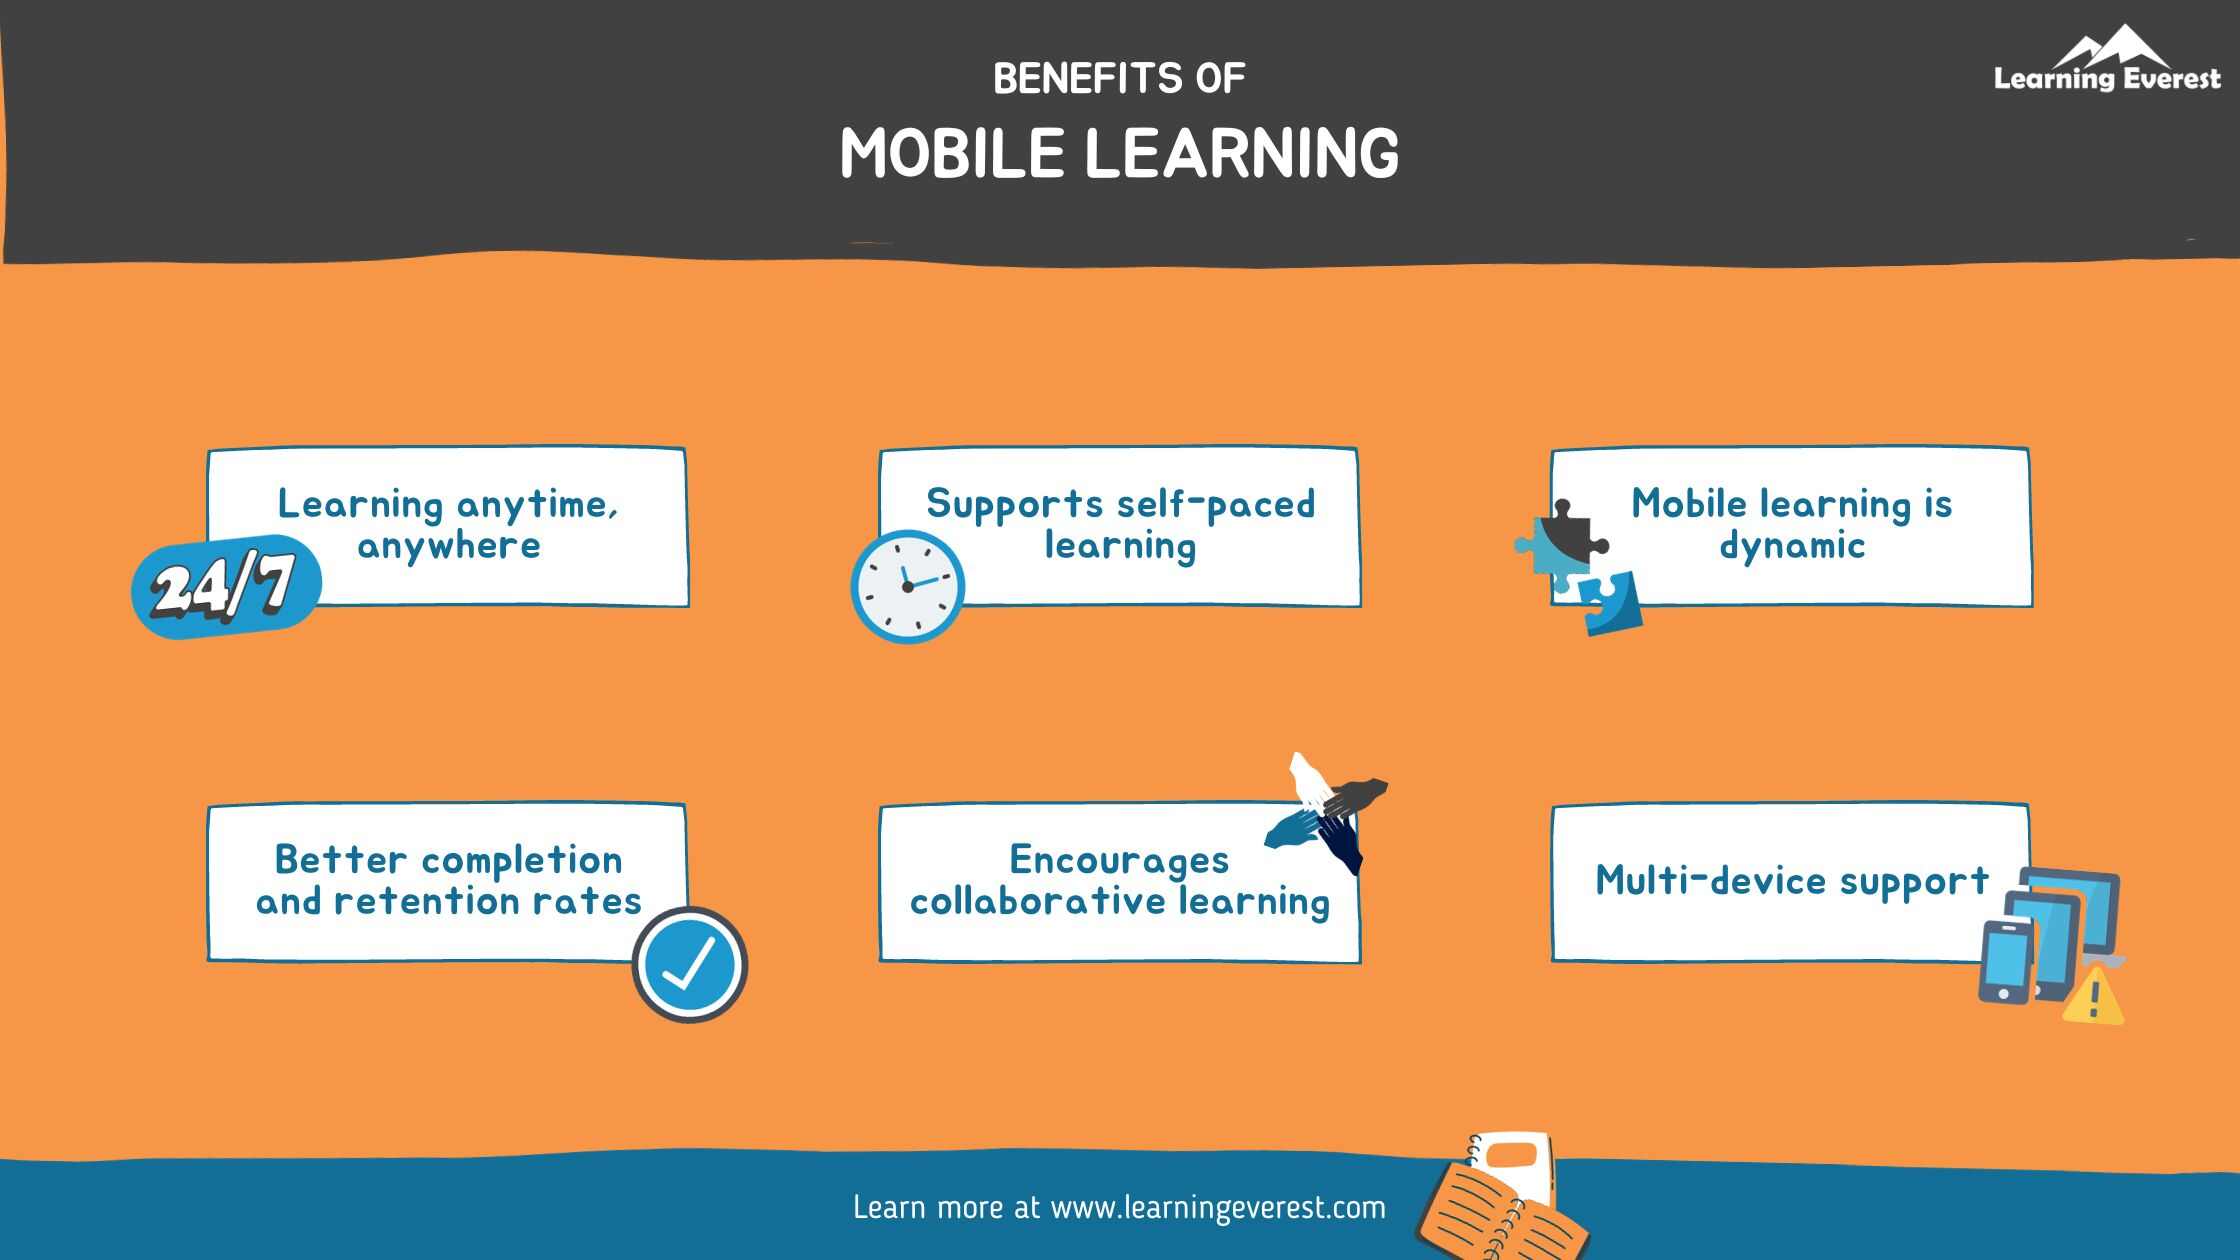 Benefis of Mobile Learning